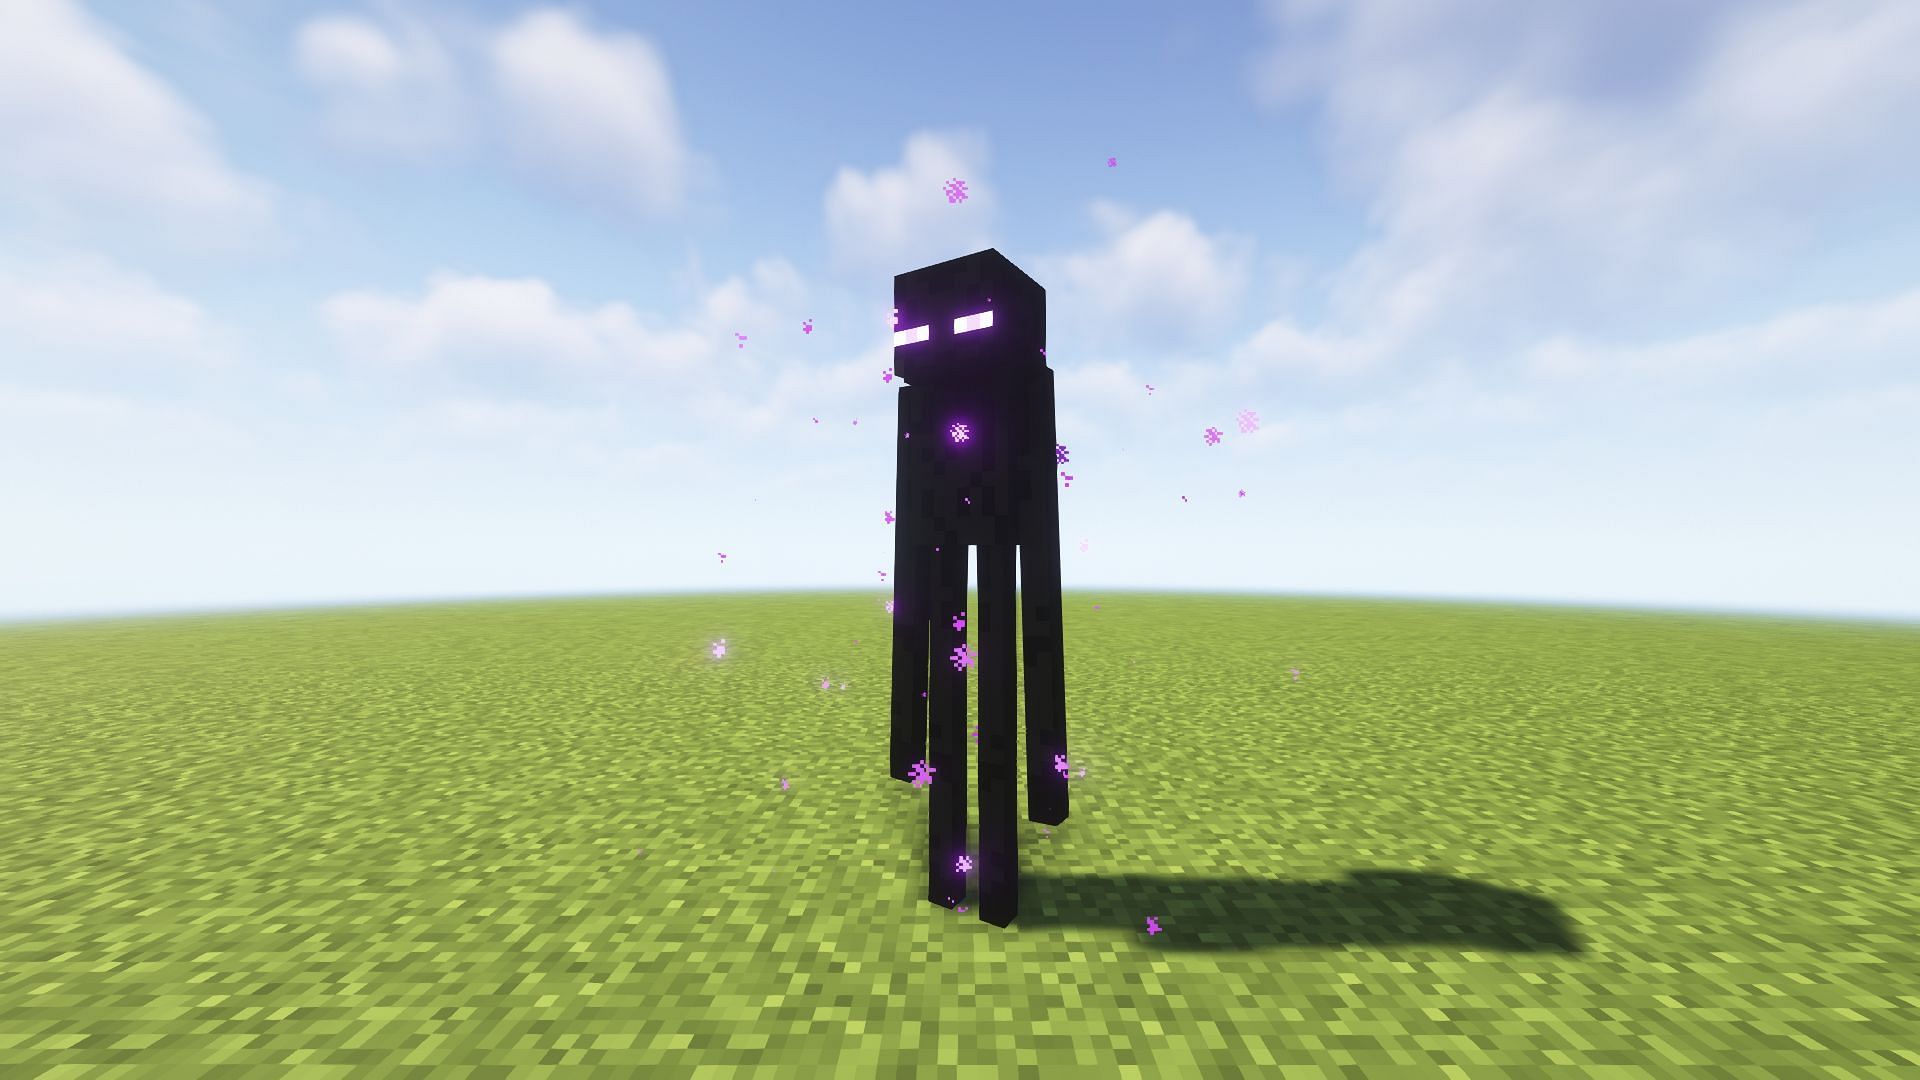 Minecraft Redditor encounters a friendly Enderman that does not attack even if stared at (Image via Mojang)